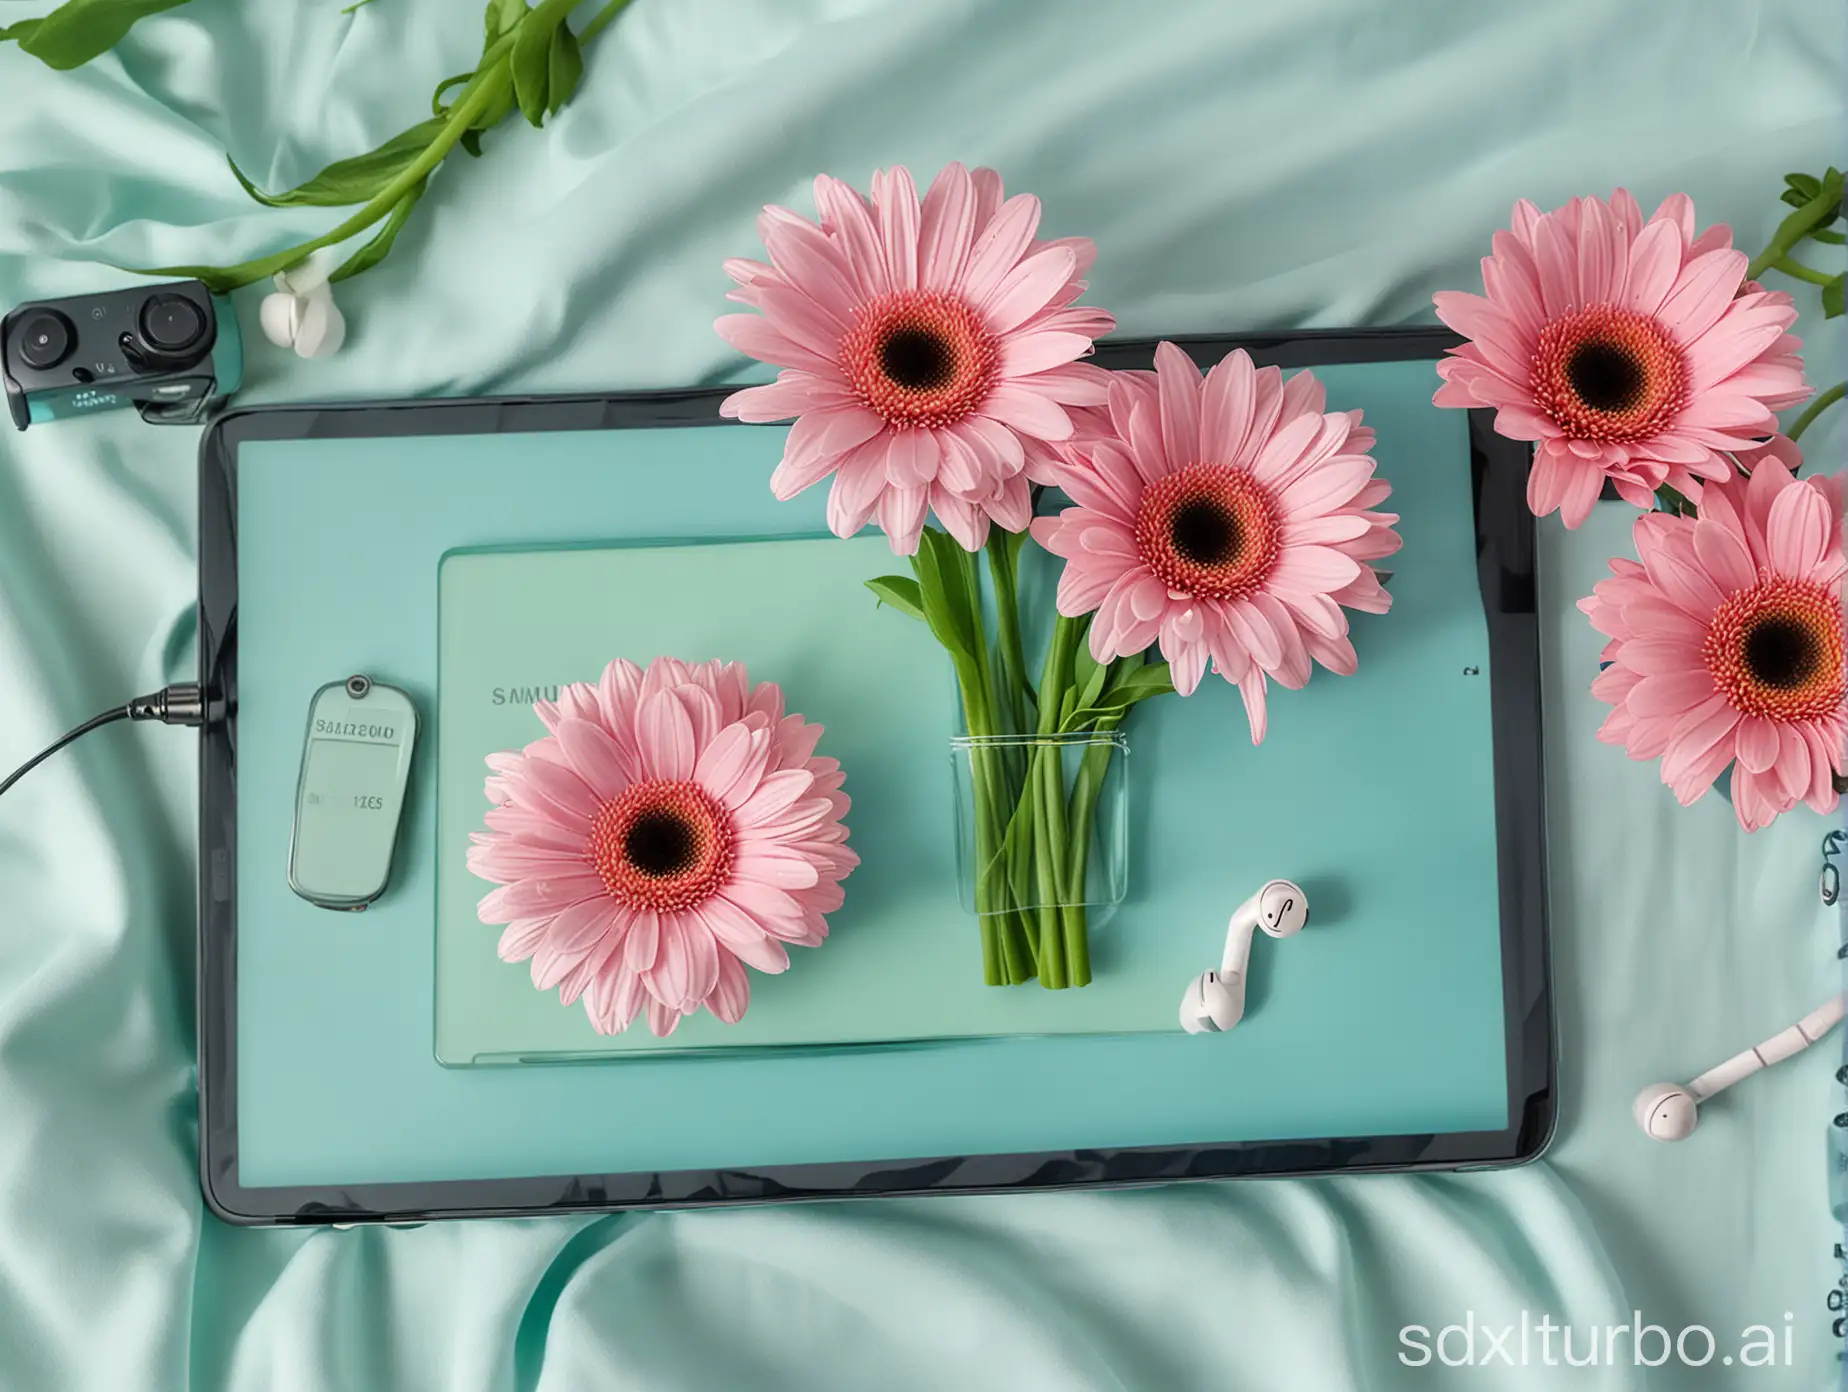 Text Henny on Samsung laptop, Samsung mobile phone, earbuds, palm, light pink and light green gerberas, background blue aquablue green sheets